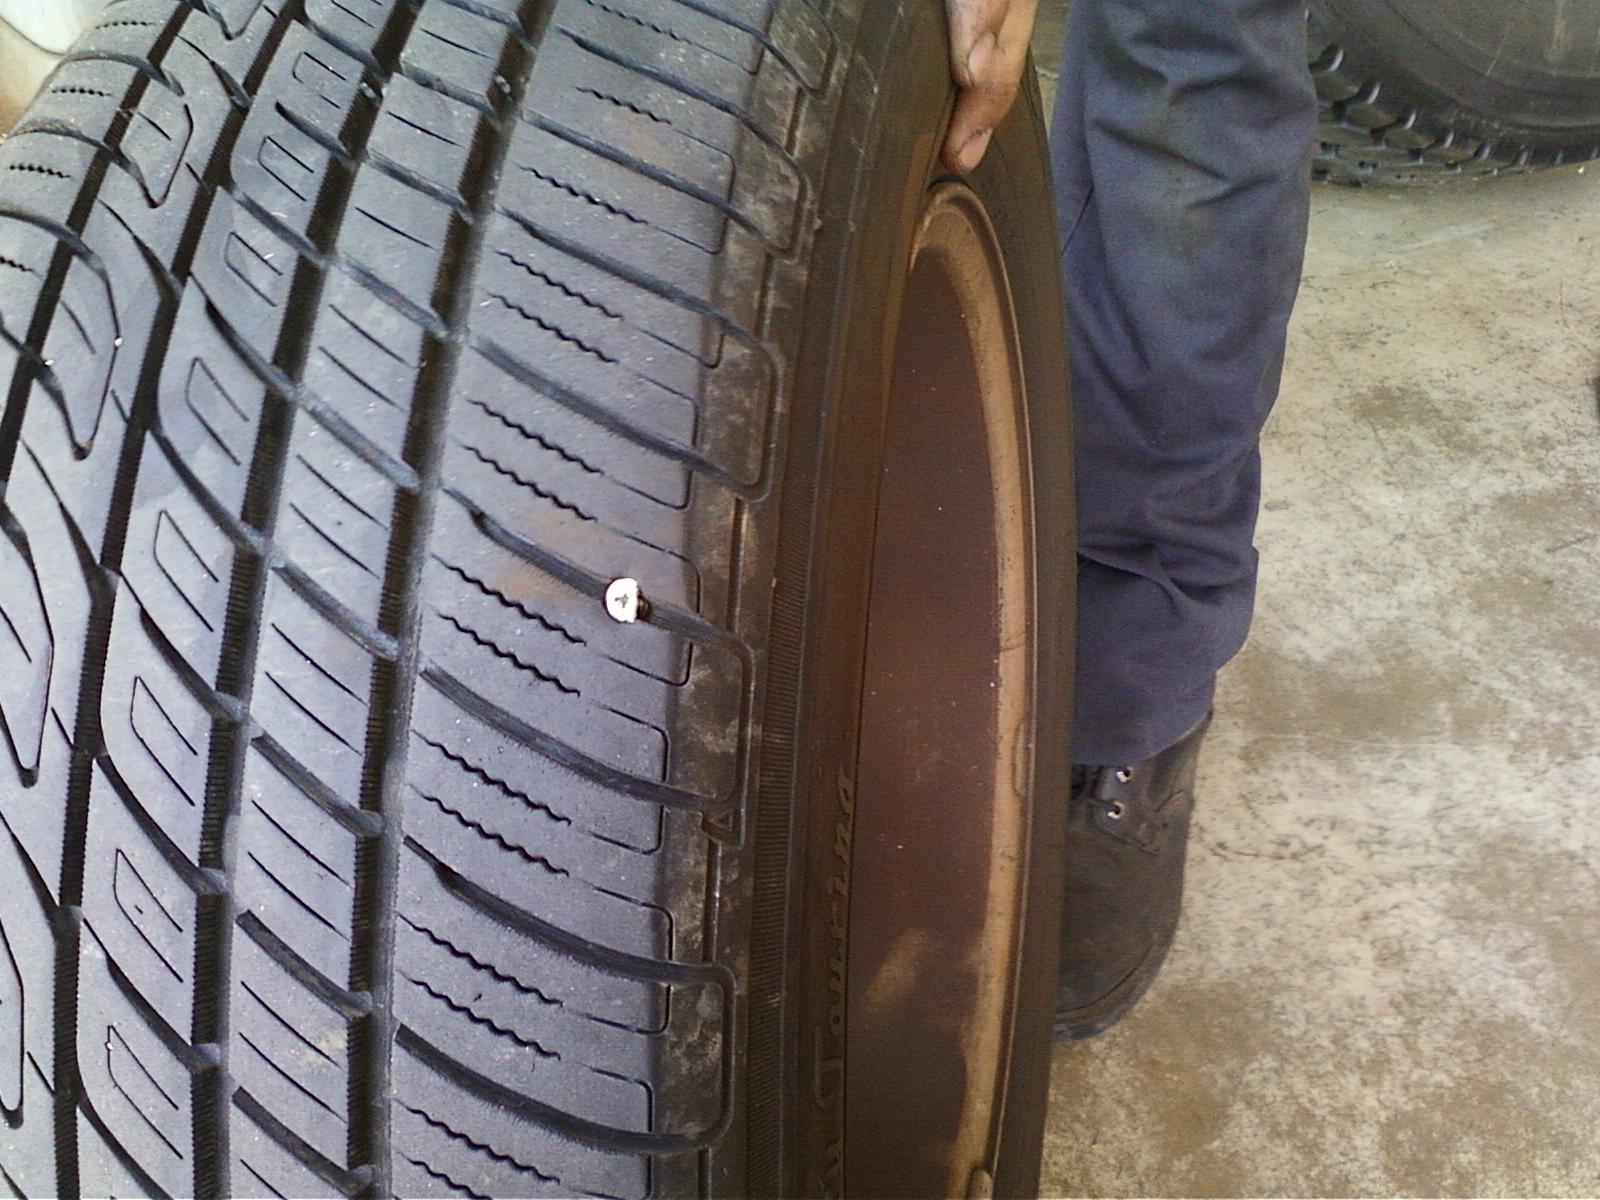 In down back Tire, nail plugged in. Man make work have